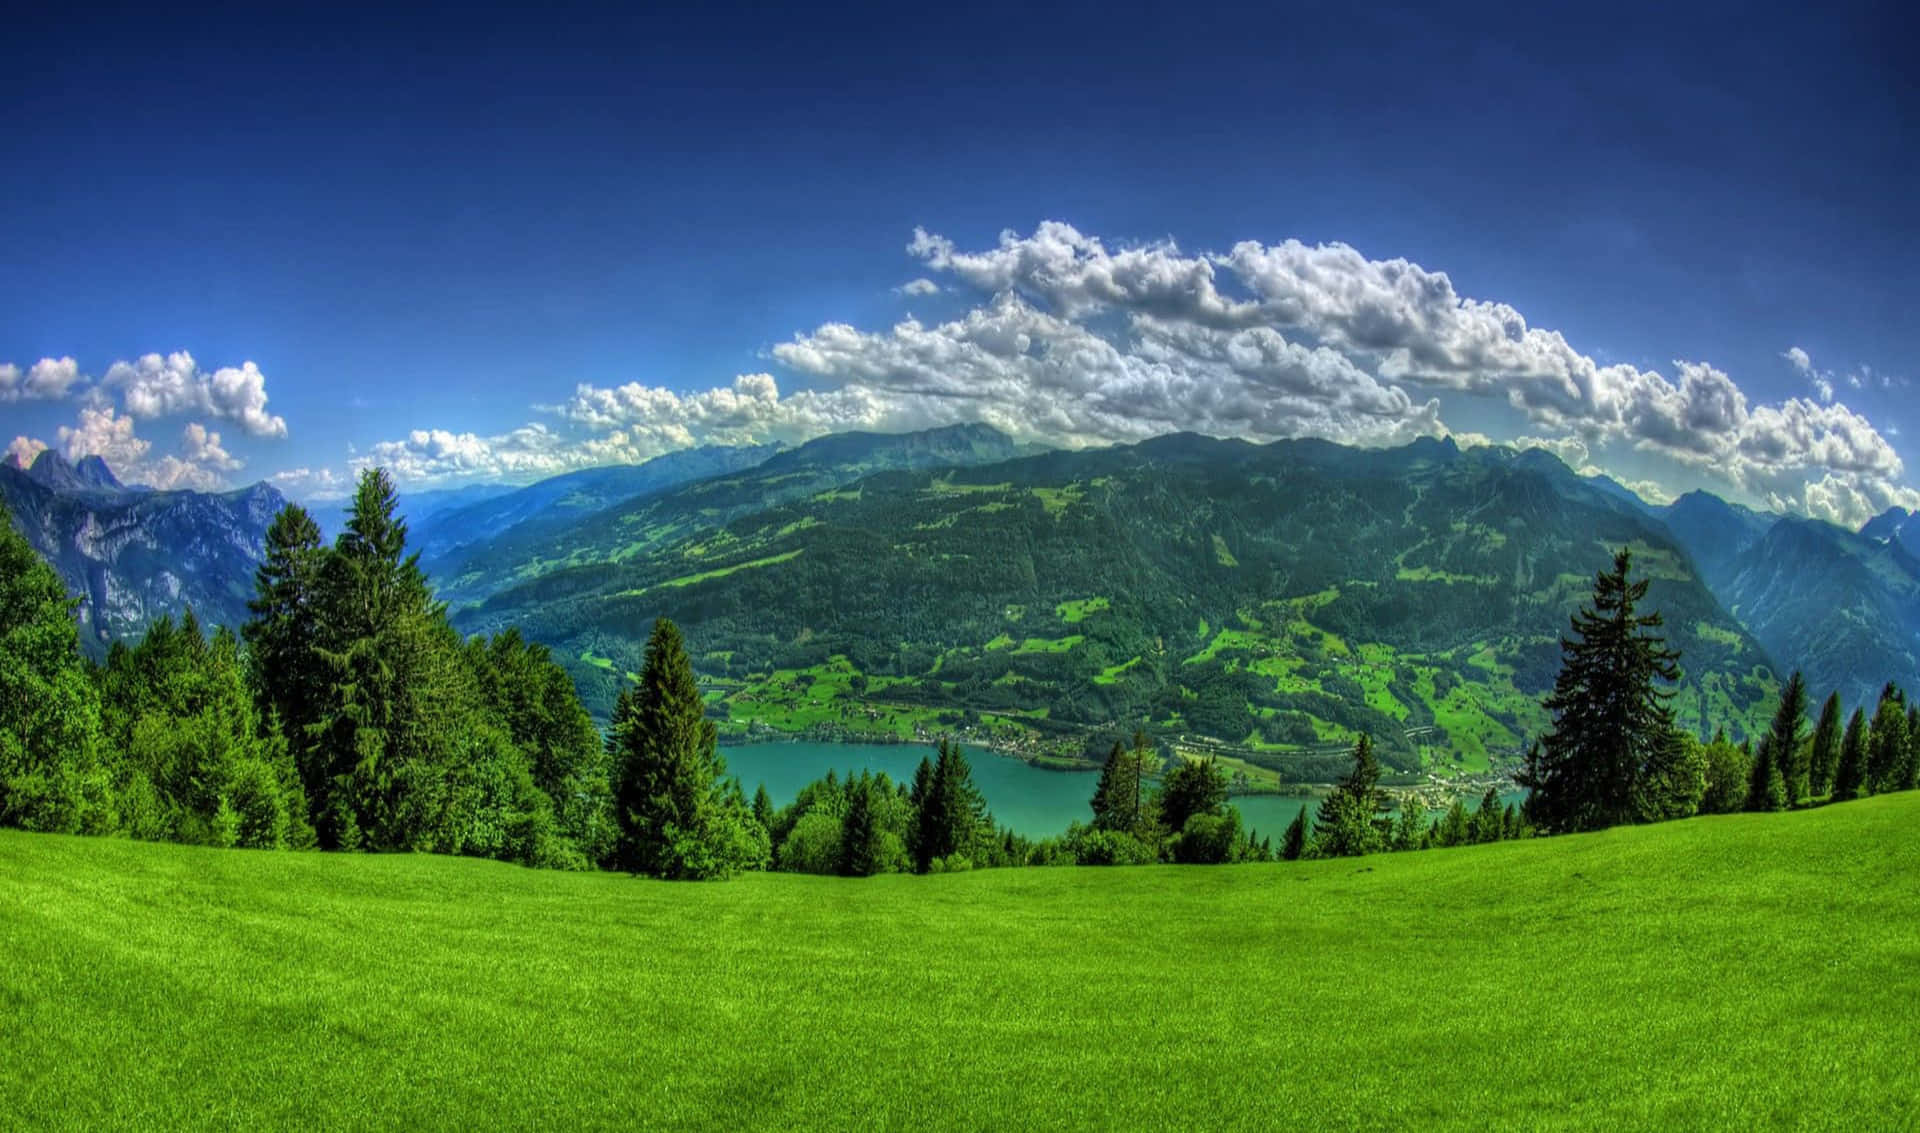 a green field with trees and a lake